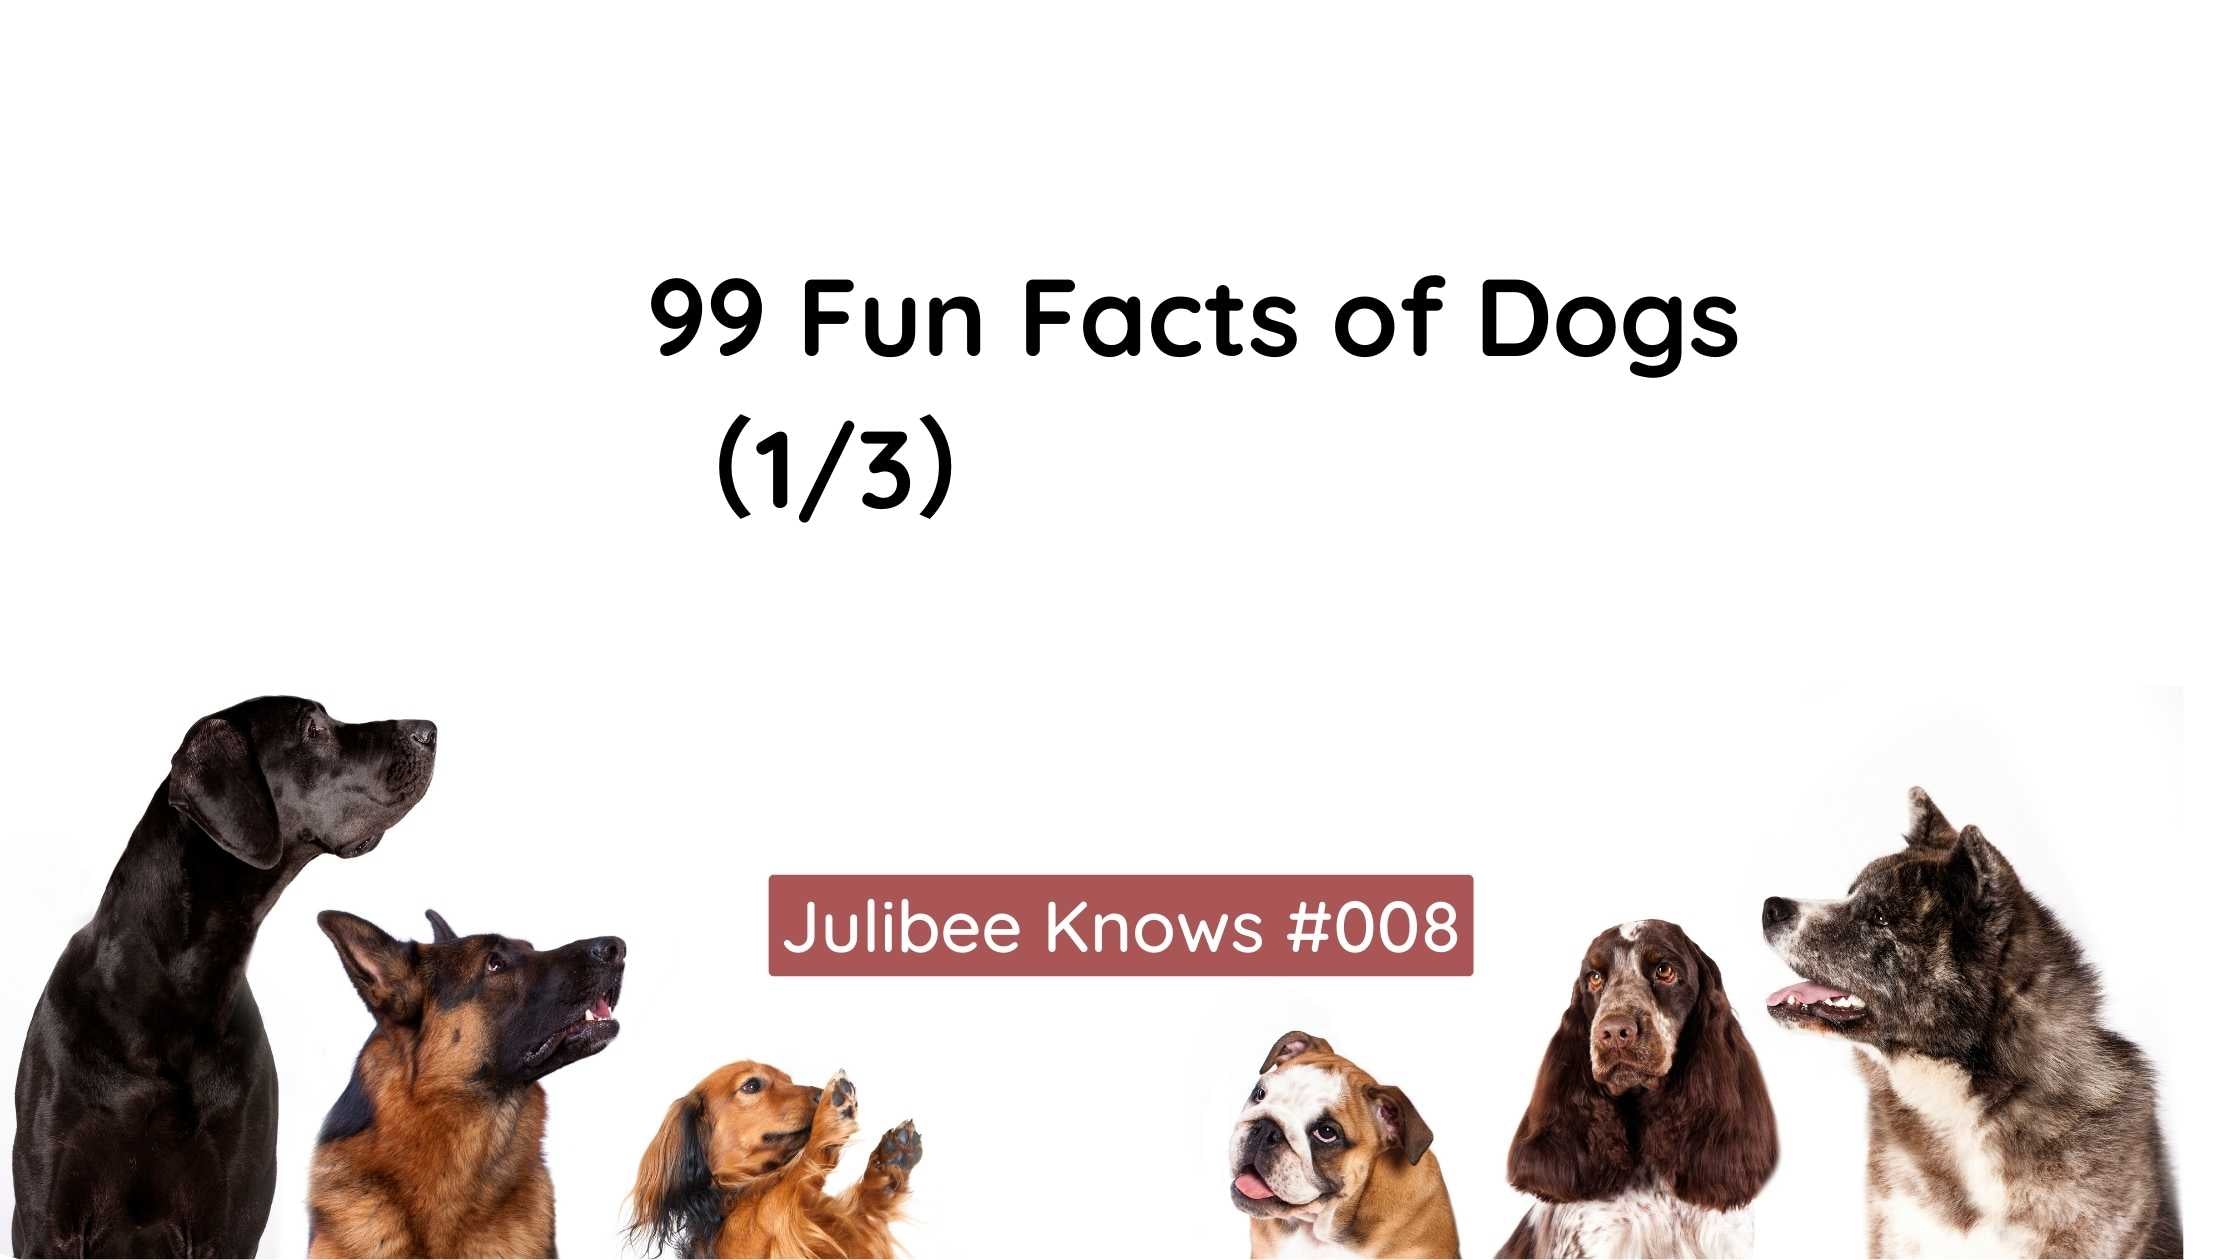 99 Fun Facts about Dogs Vol1 - Julibee's - Julibee's